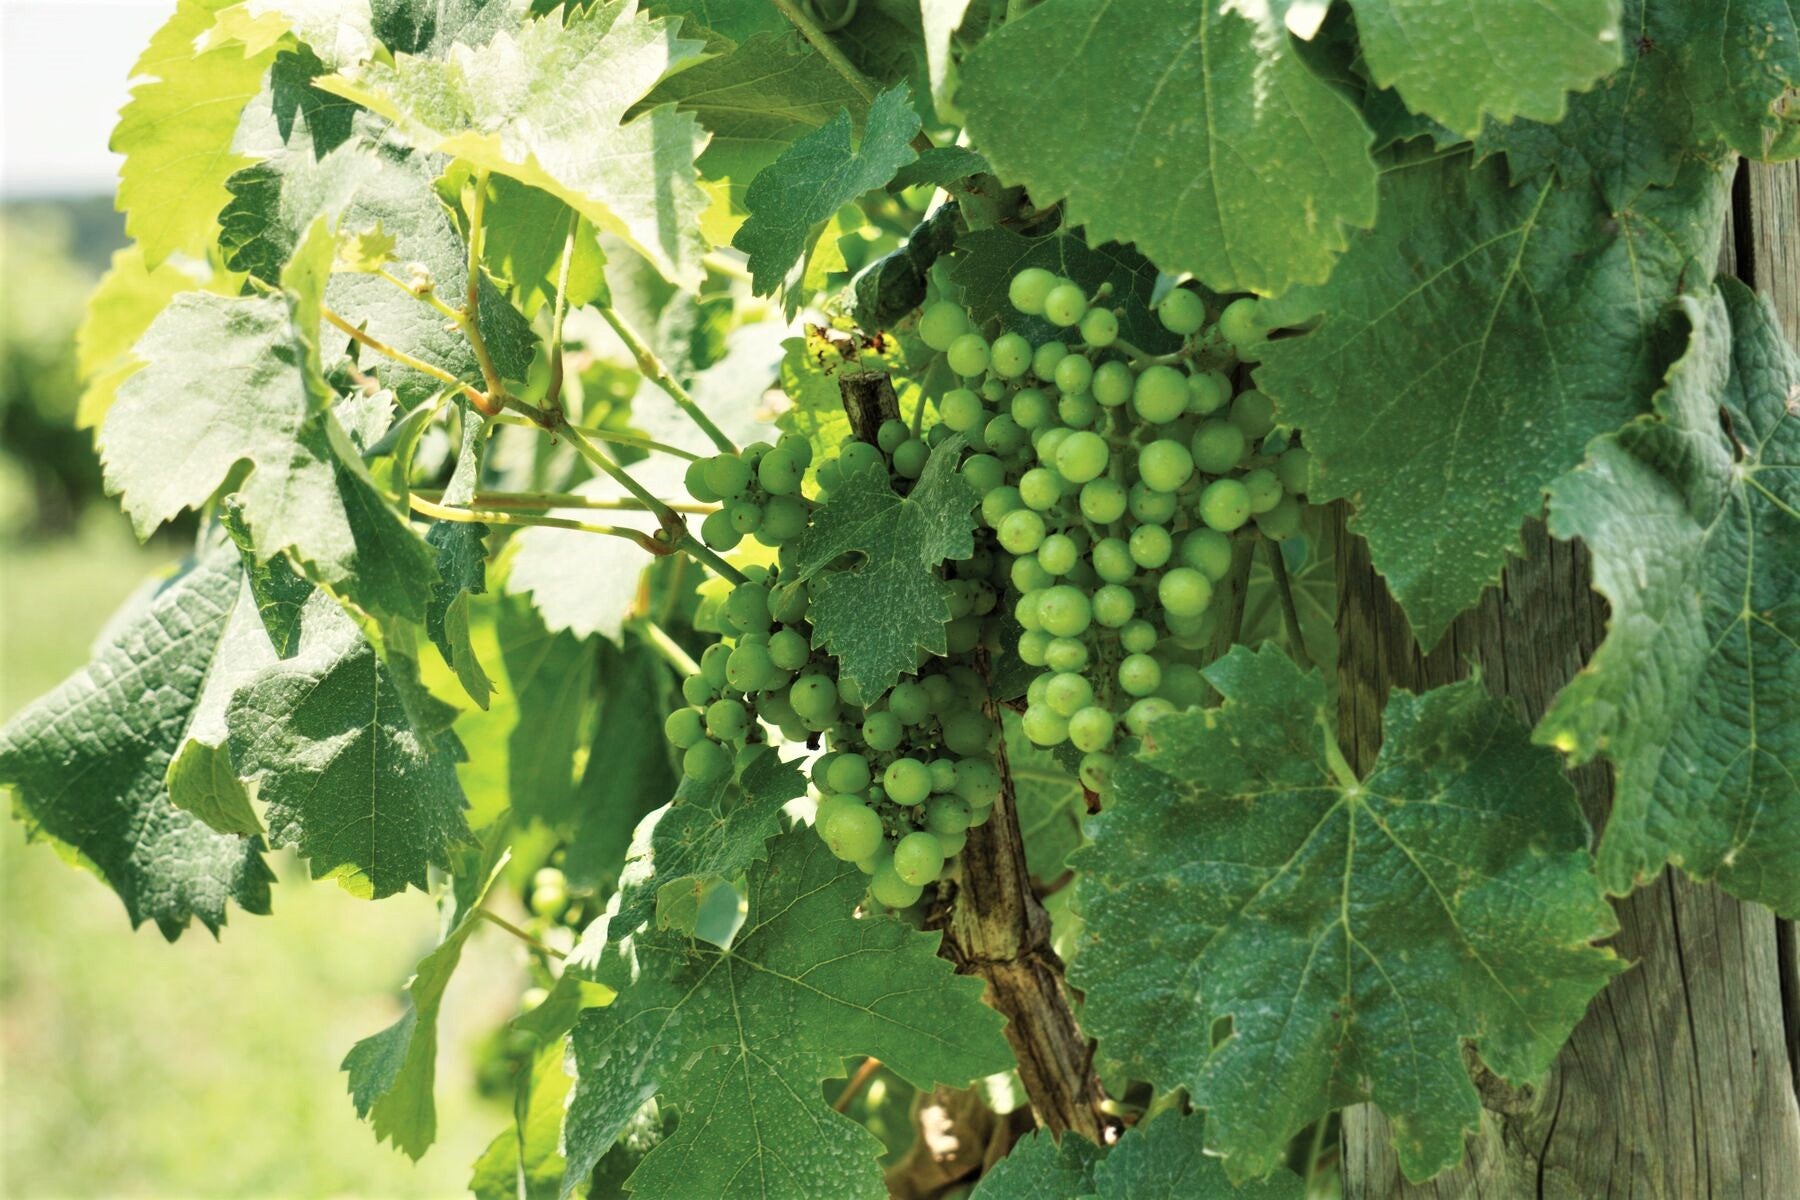 Green wine grape clusters on a vine